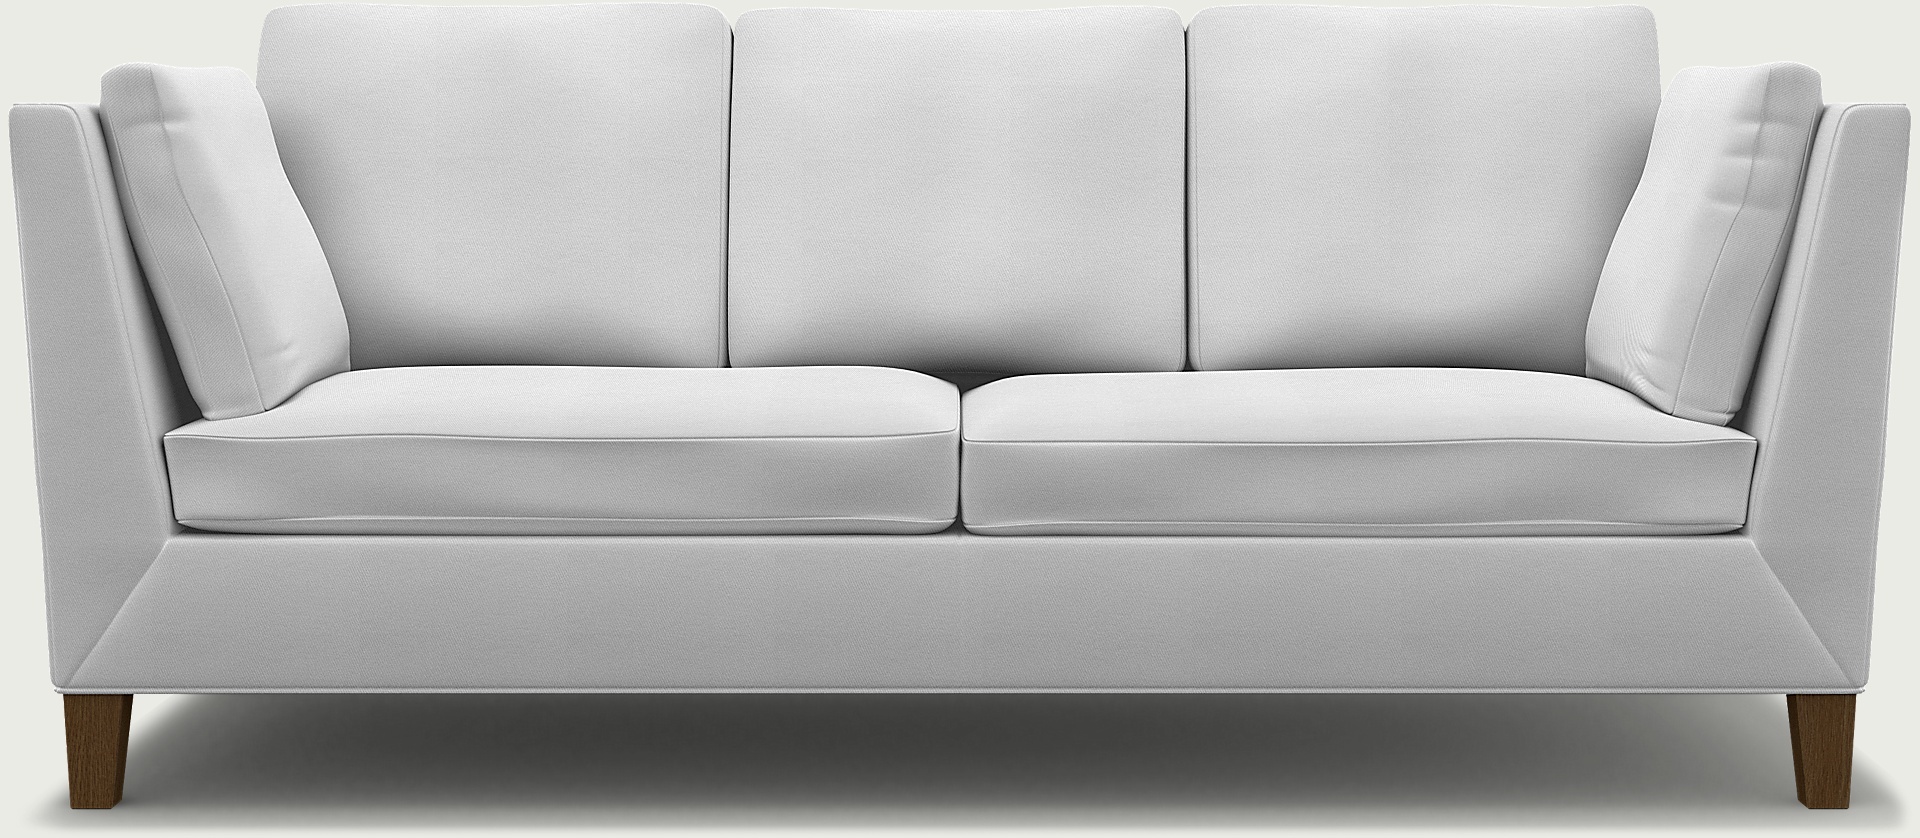 Ikea Stockholm Sofa Cover 3 Seater, How Much To Cover A 3 Seater Sofa